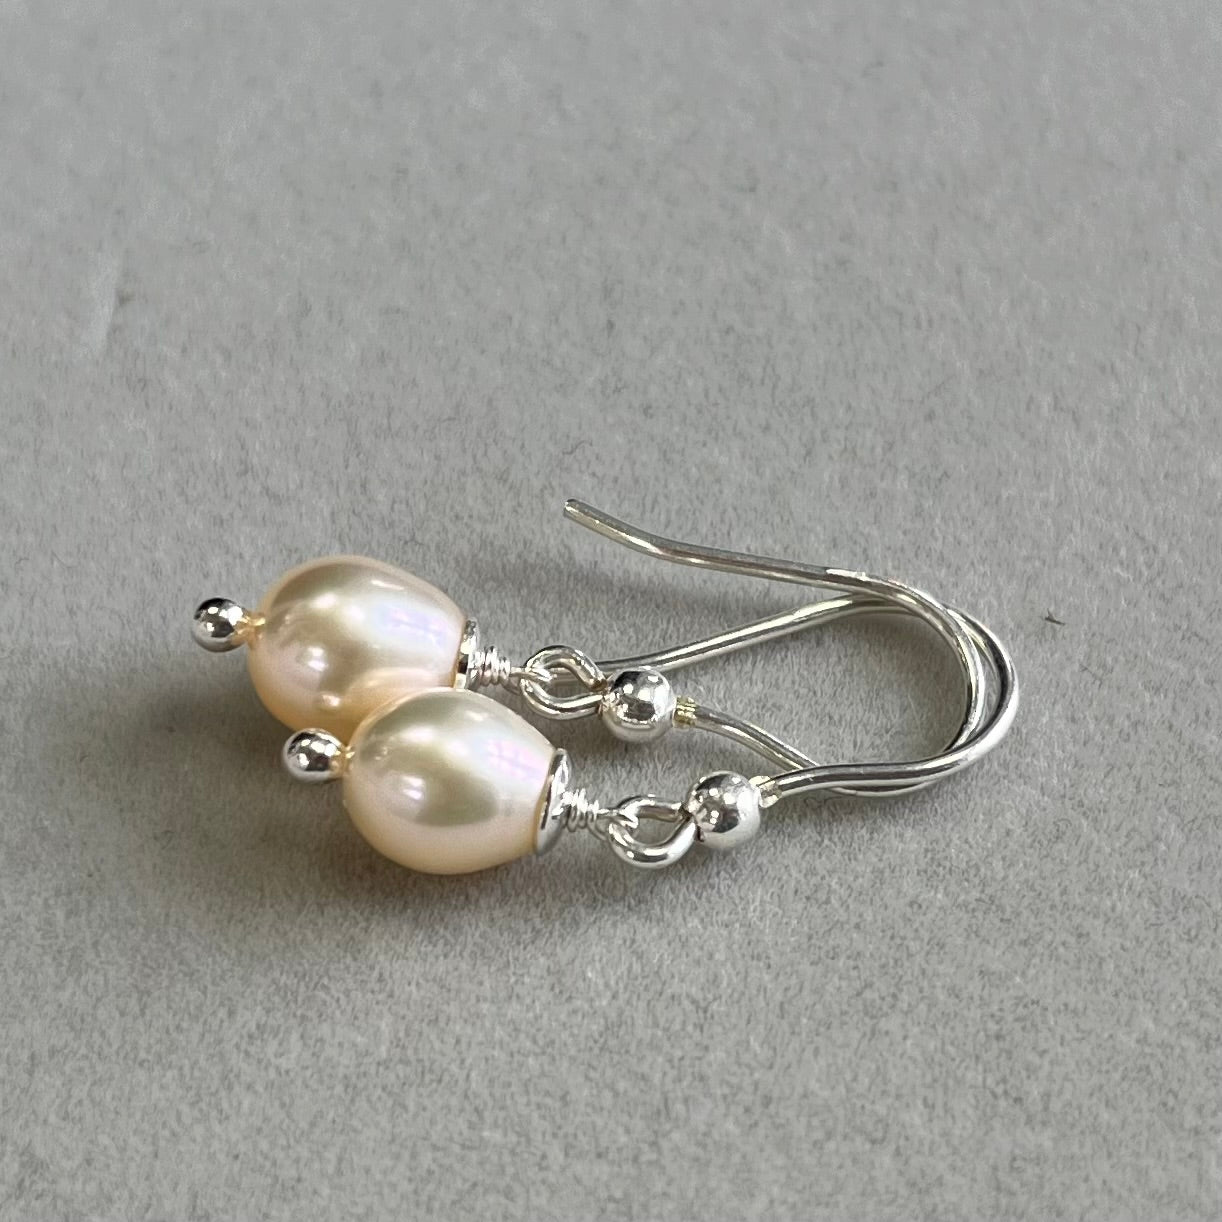 Earrings with pearls, slightly pink color